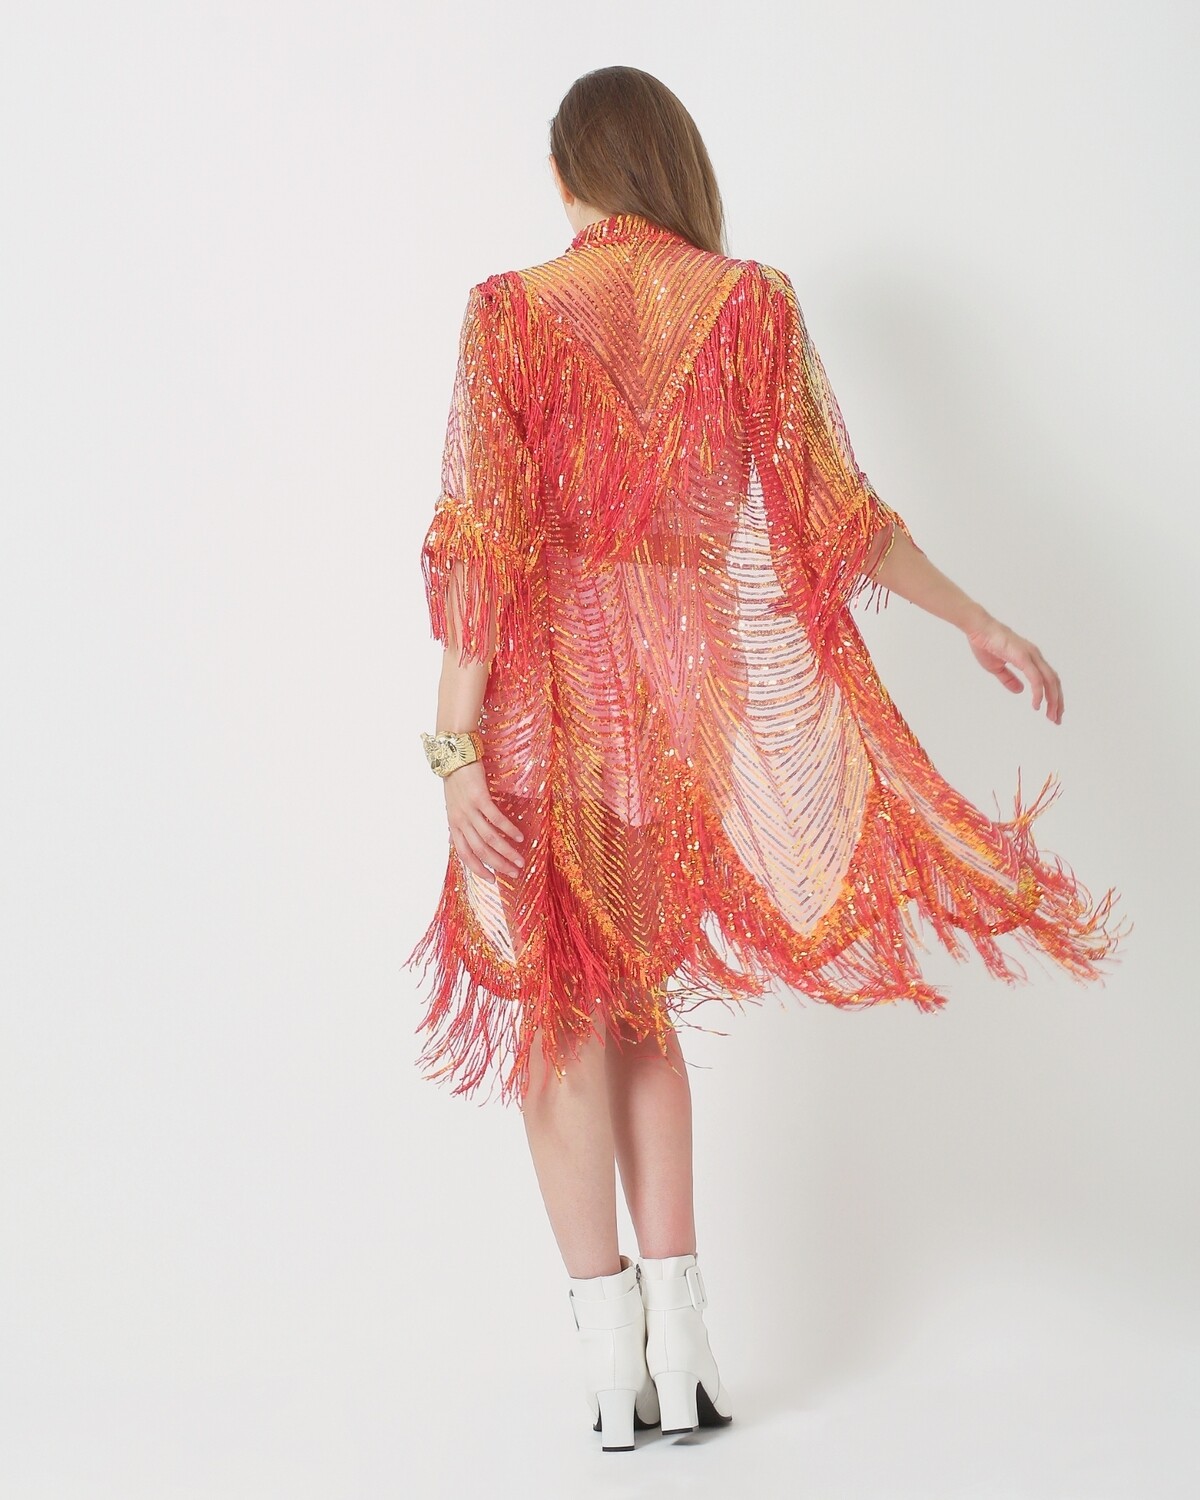 Sequin Kimono with Tassels - Burningman Festival Outfit